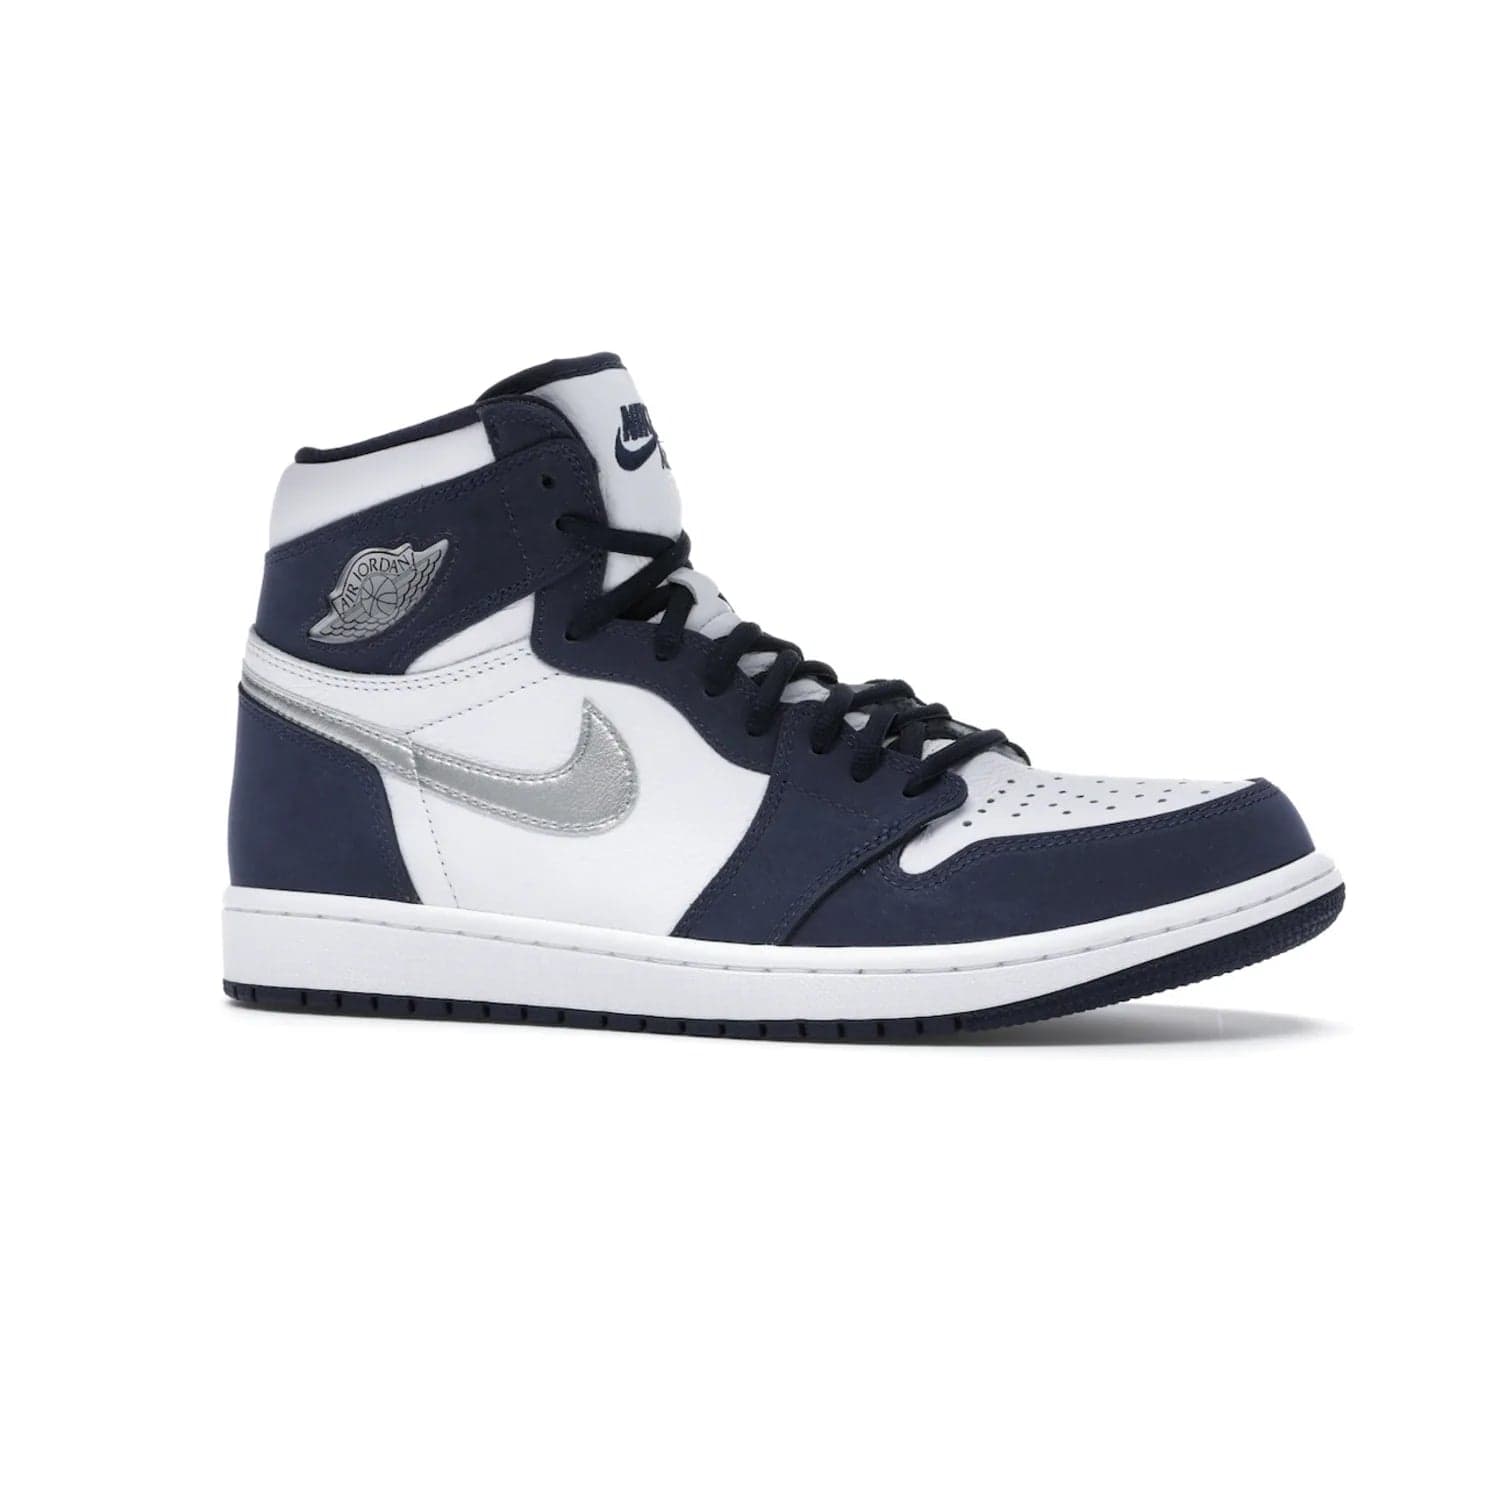 Jordan 1 Retro High COJP Midnight Navy (2020) - Image 3 - Only at www.BallersClubKickz.com - Air Jordan 1 Retro High COJP Midnight Navy - Iconic silhouette updated with a modern touch. Be ahead of the game with this timeless style. Get it now.